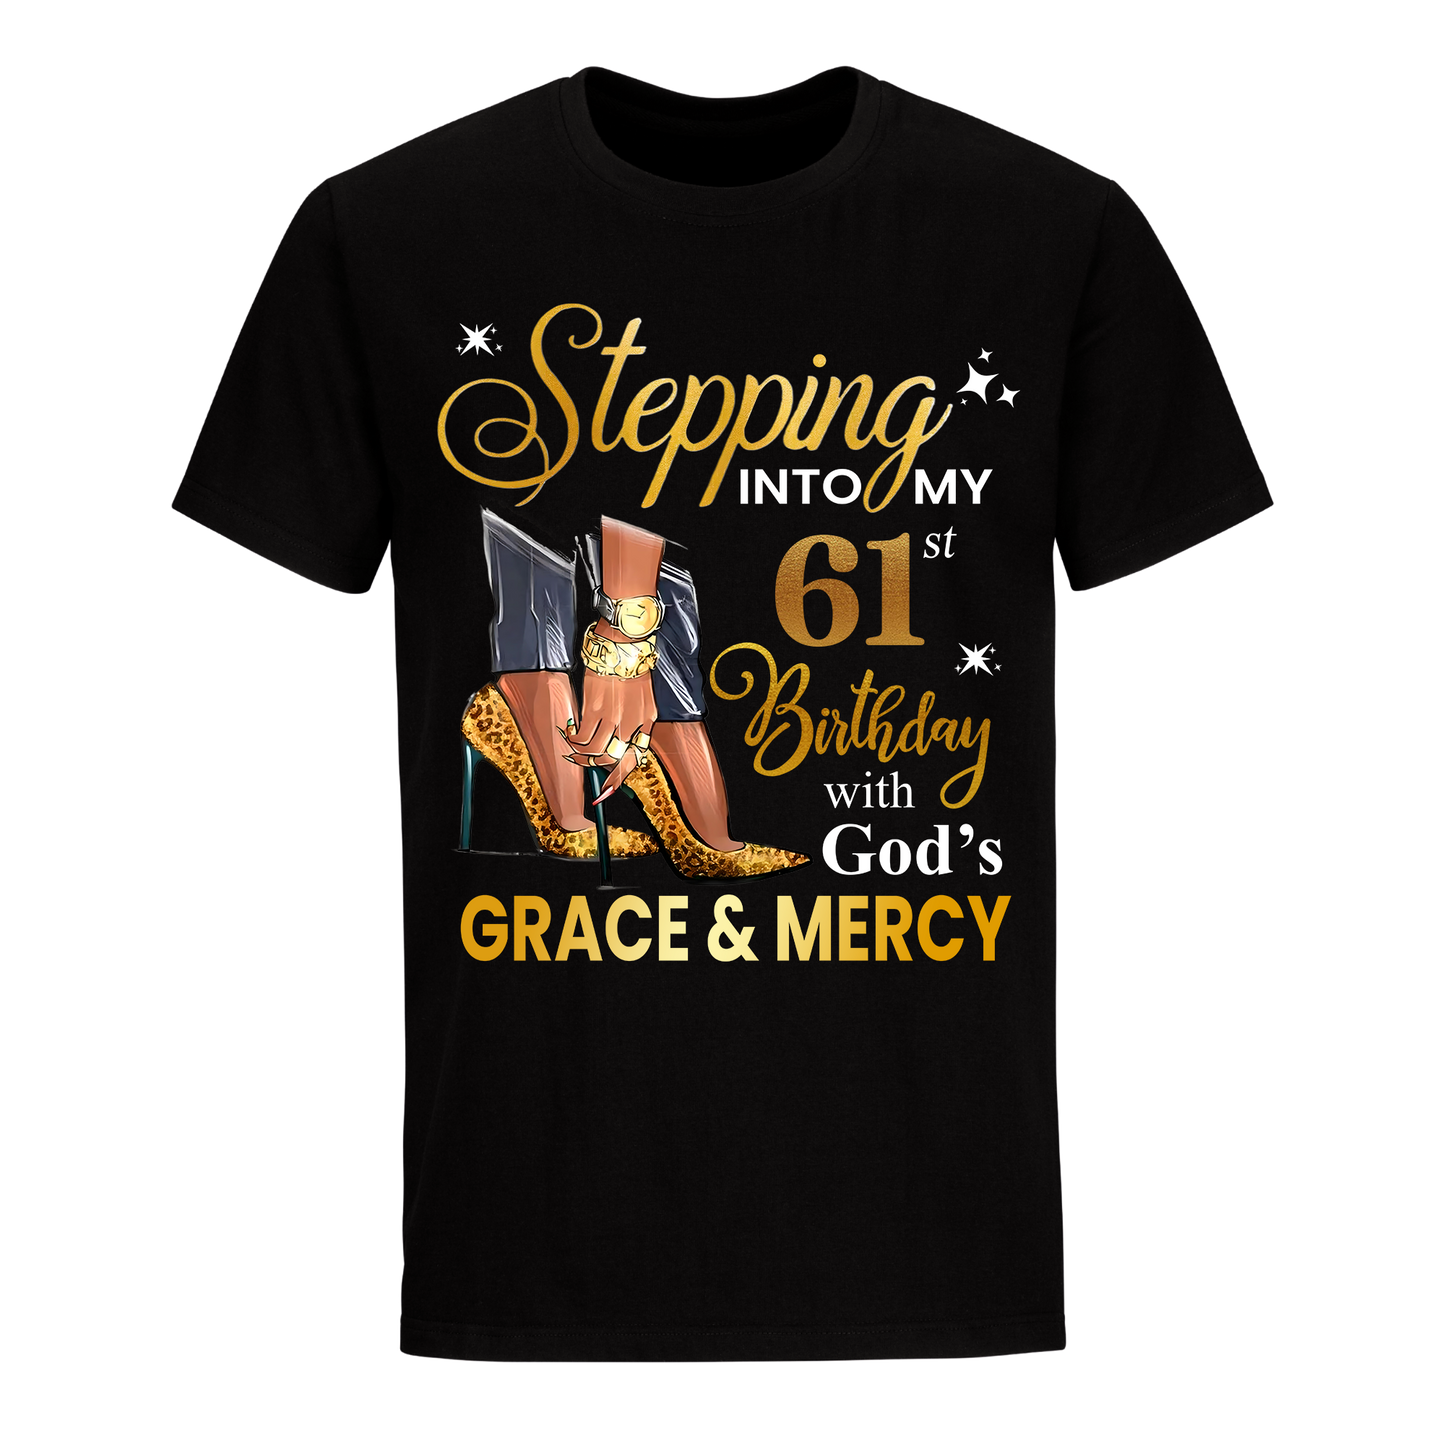 STEPPING INTO MY GRACE AND MERCY 61ST BIRTHDAY UNISEX SHIRT